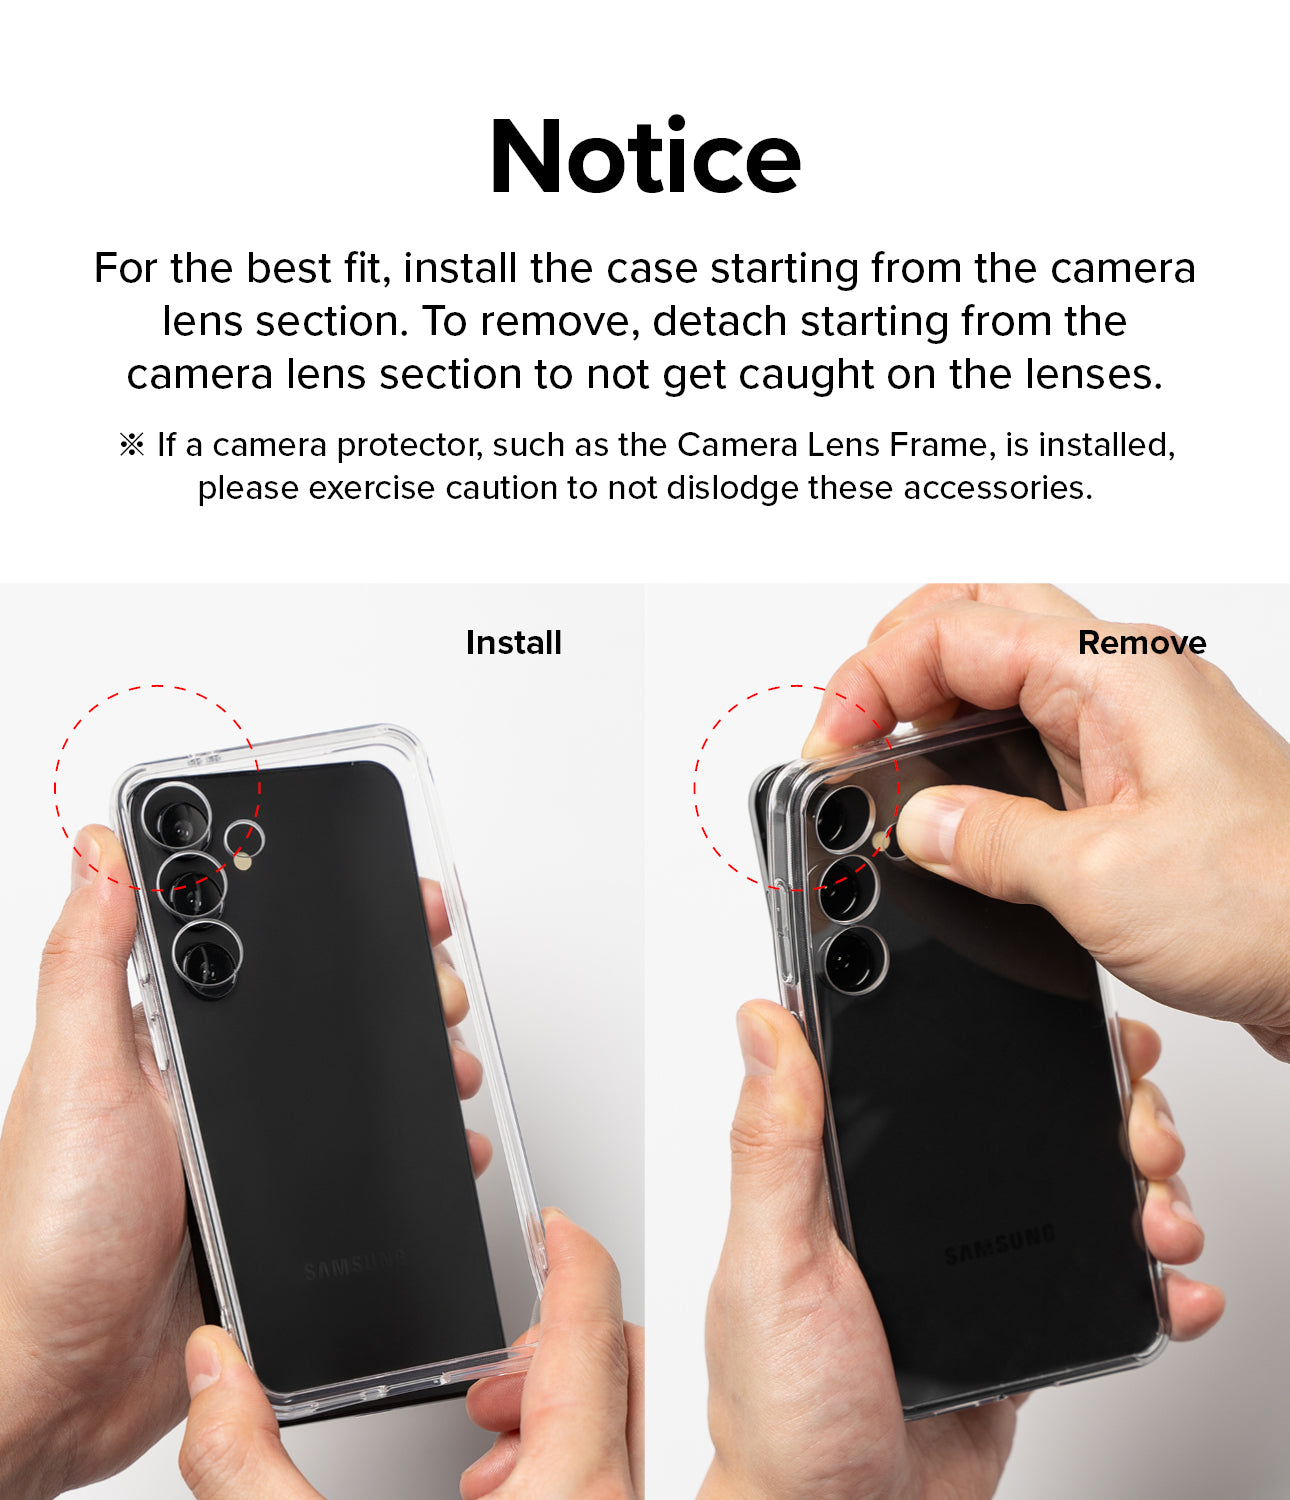 Galaxy A35 Case | Fusion Matte - Notice. For the best fit, install the case starting from the camera lens section. To remove, detach starting from the camera lens section to not get caught on the lenses.